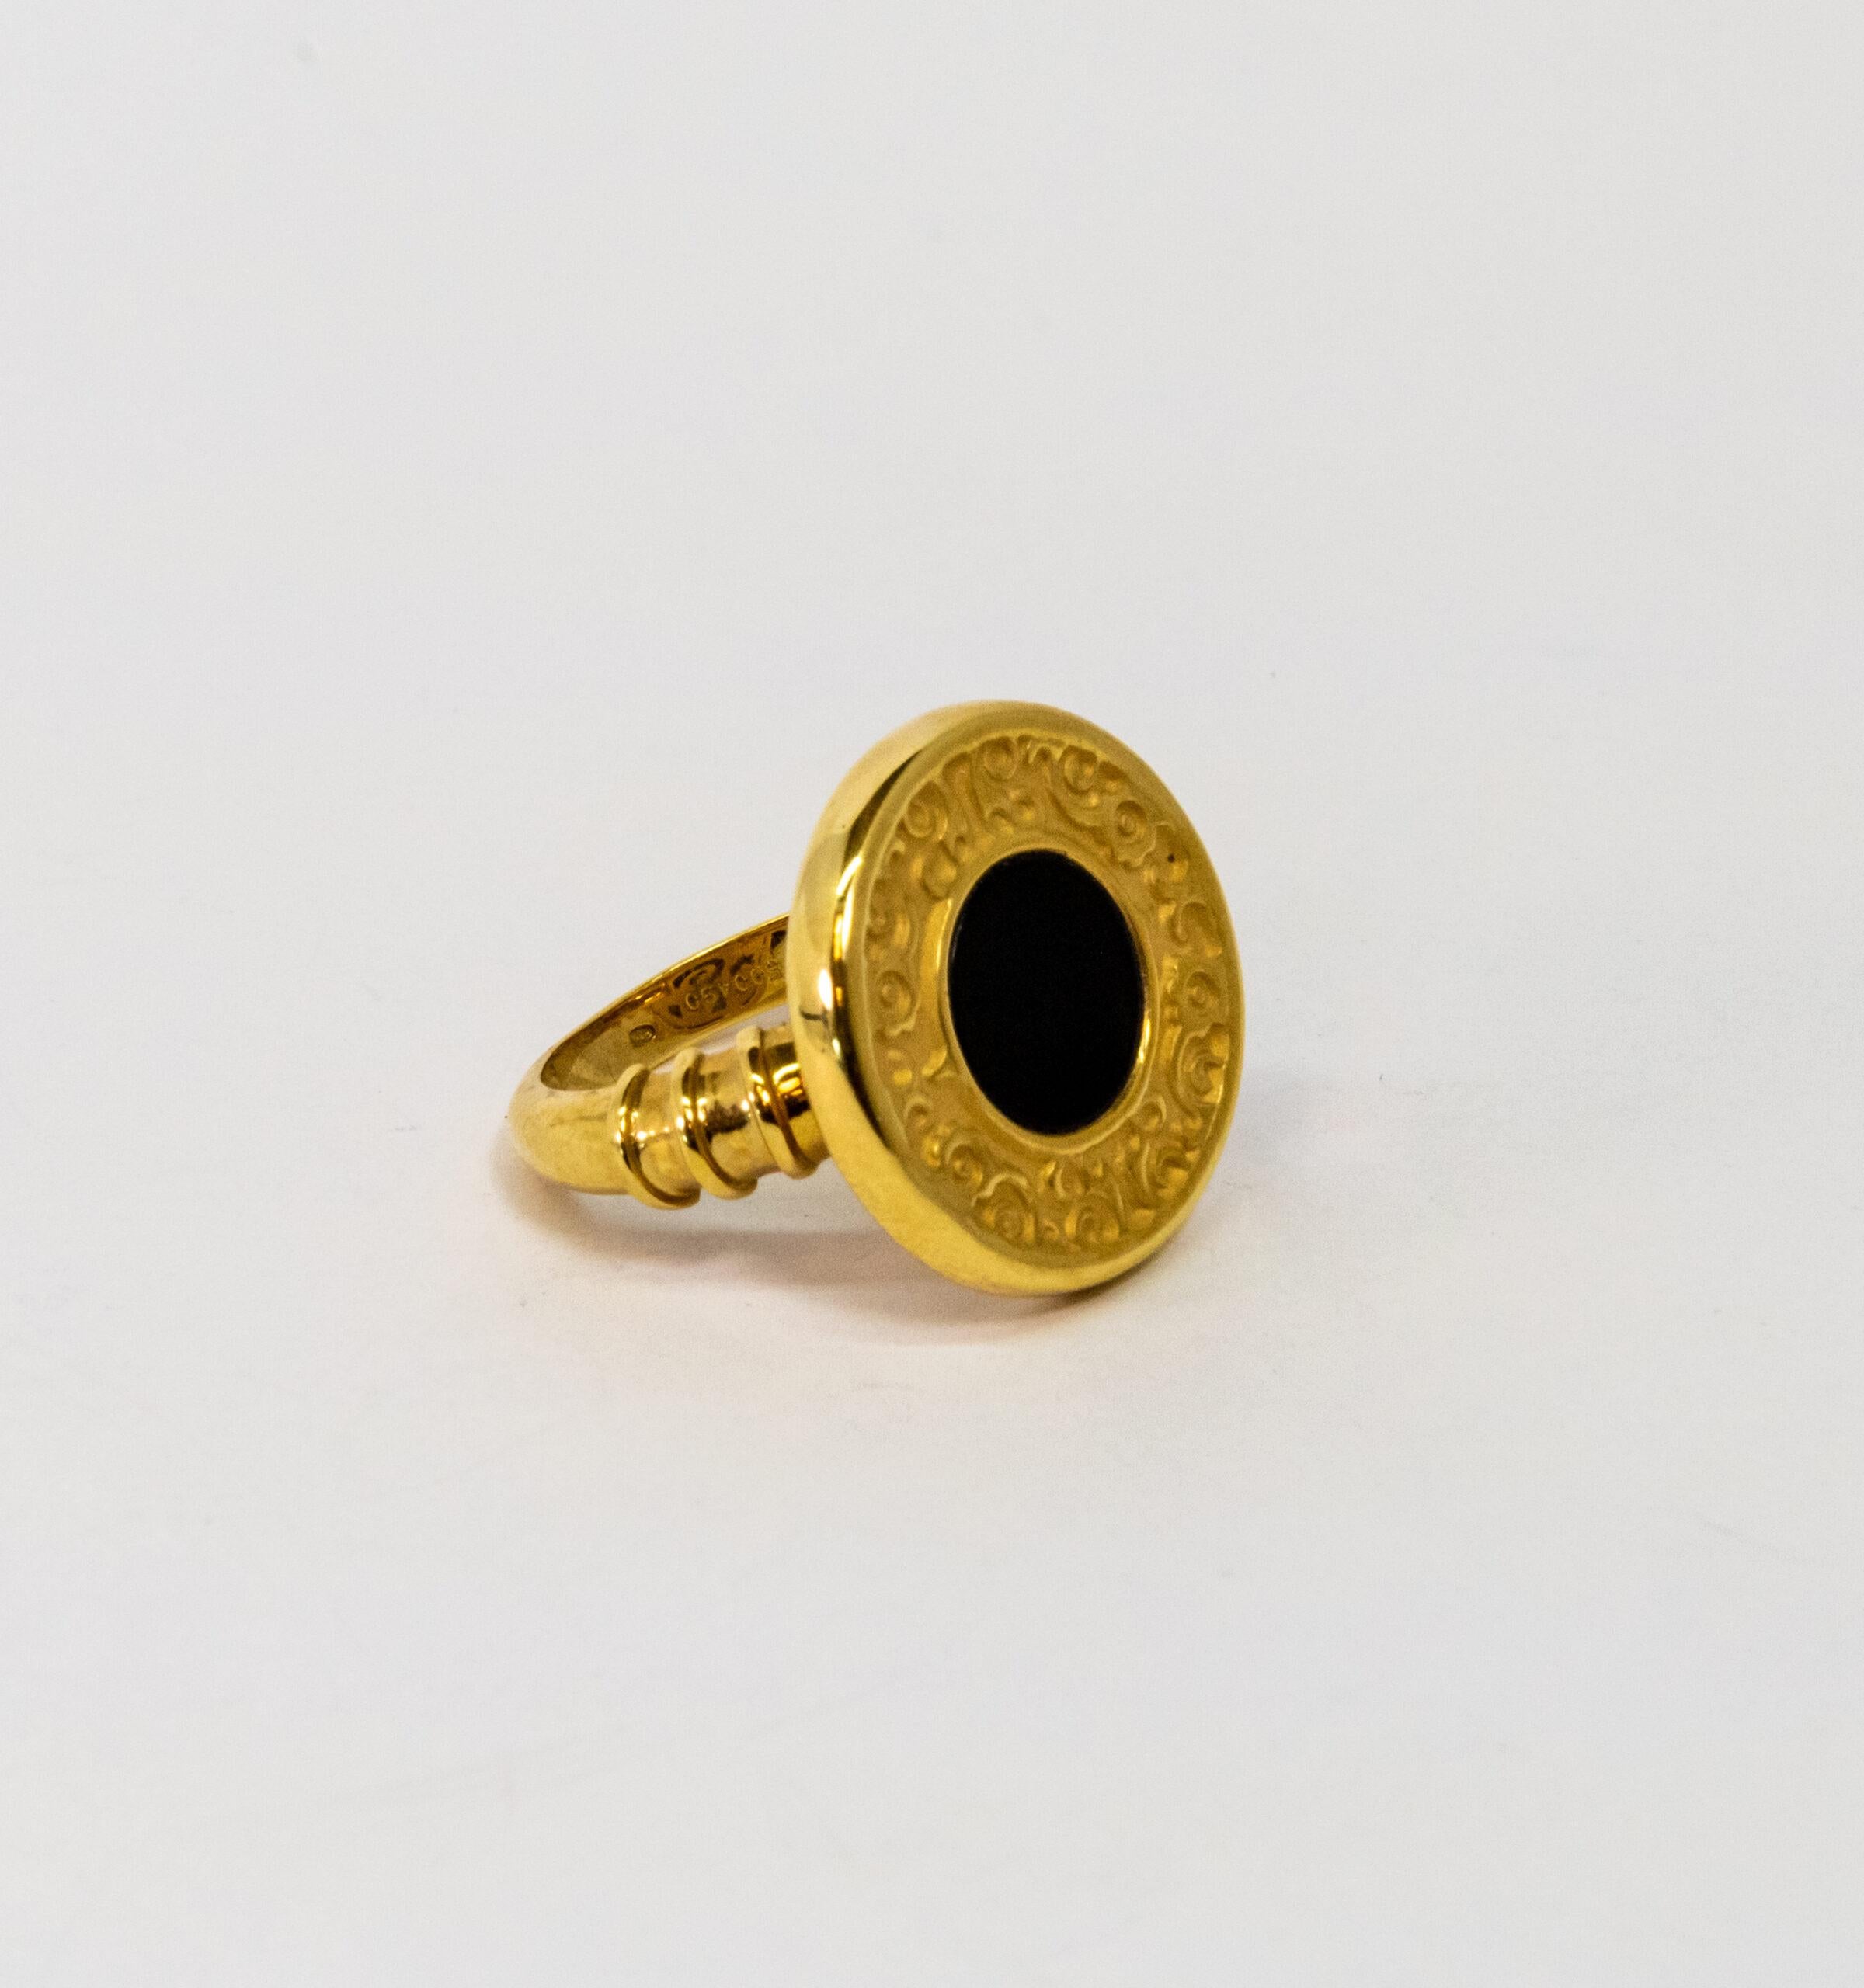 This ring is made of 18K Yellow Gold. It is decorated with black Onyx circle.

Size – 53.5 (6.5 US)